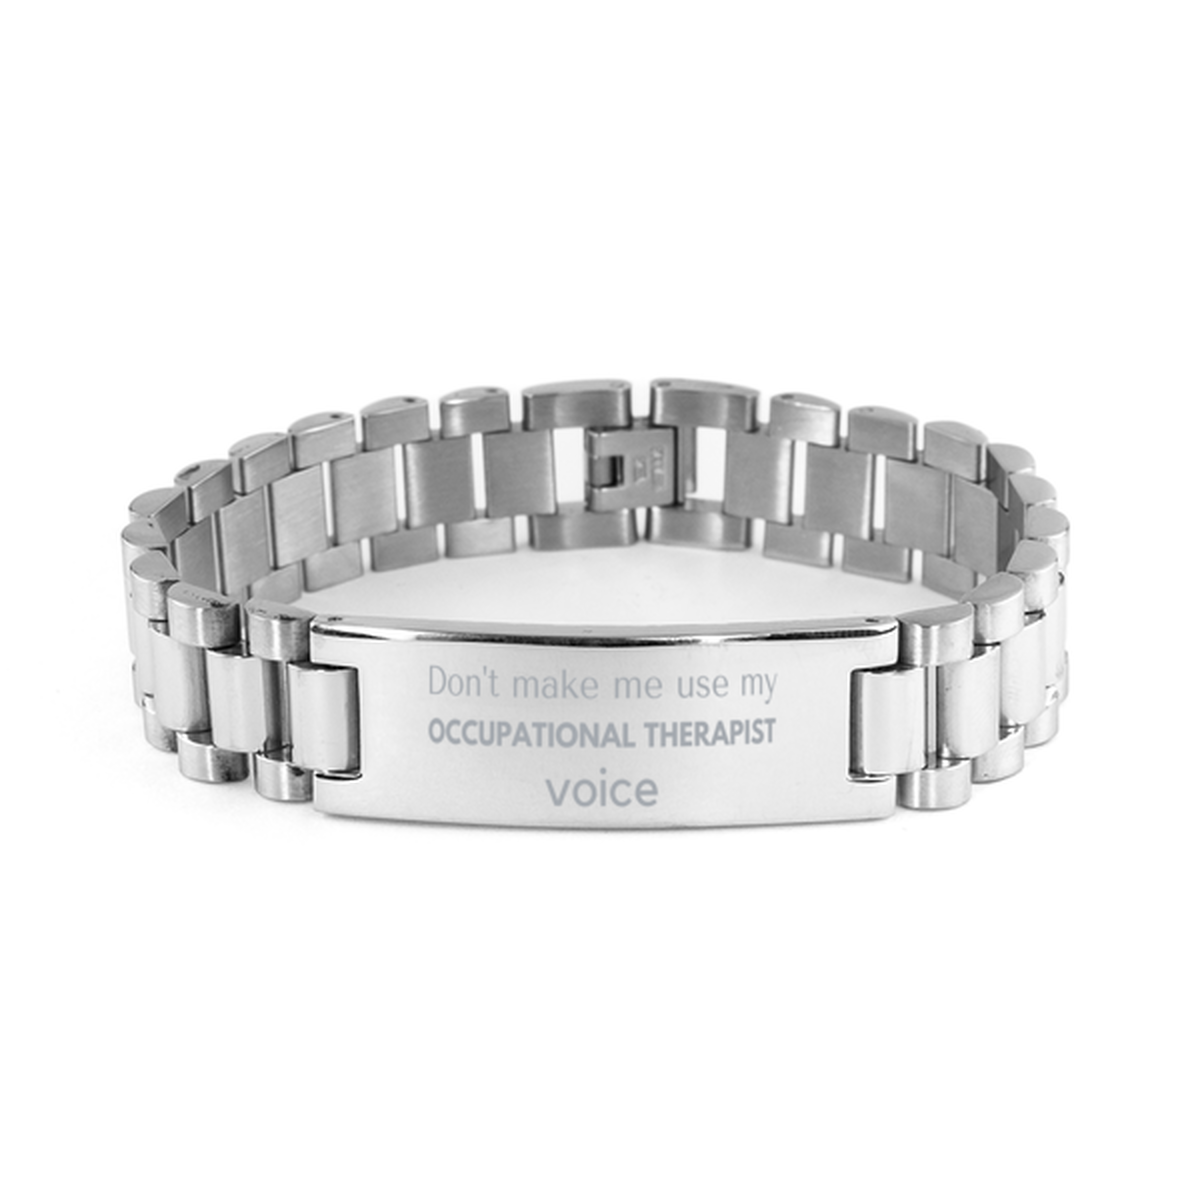 Don't make me use my Occupational Therapist voice, Sarcasm Occupational Therapist Gifts, Christmas Occupational Therapist Ladder Stainless Steel Bracelet Birthday Unique Gifts For Occupational Therapist Coworkers, Men, Women, Colleague, Friends